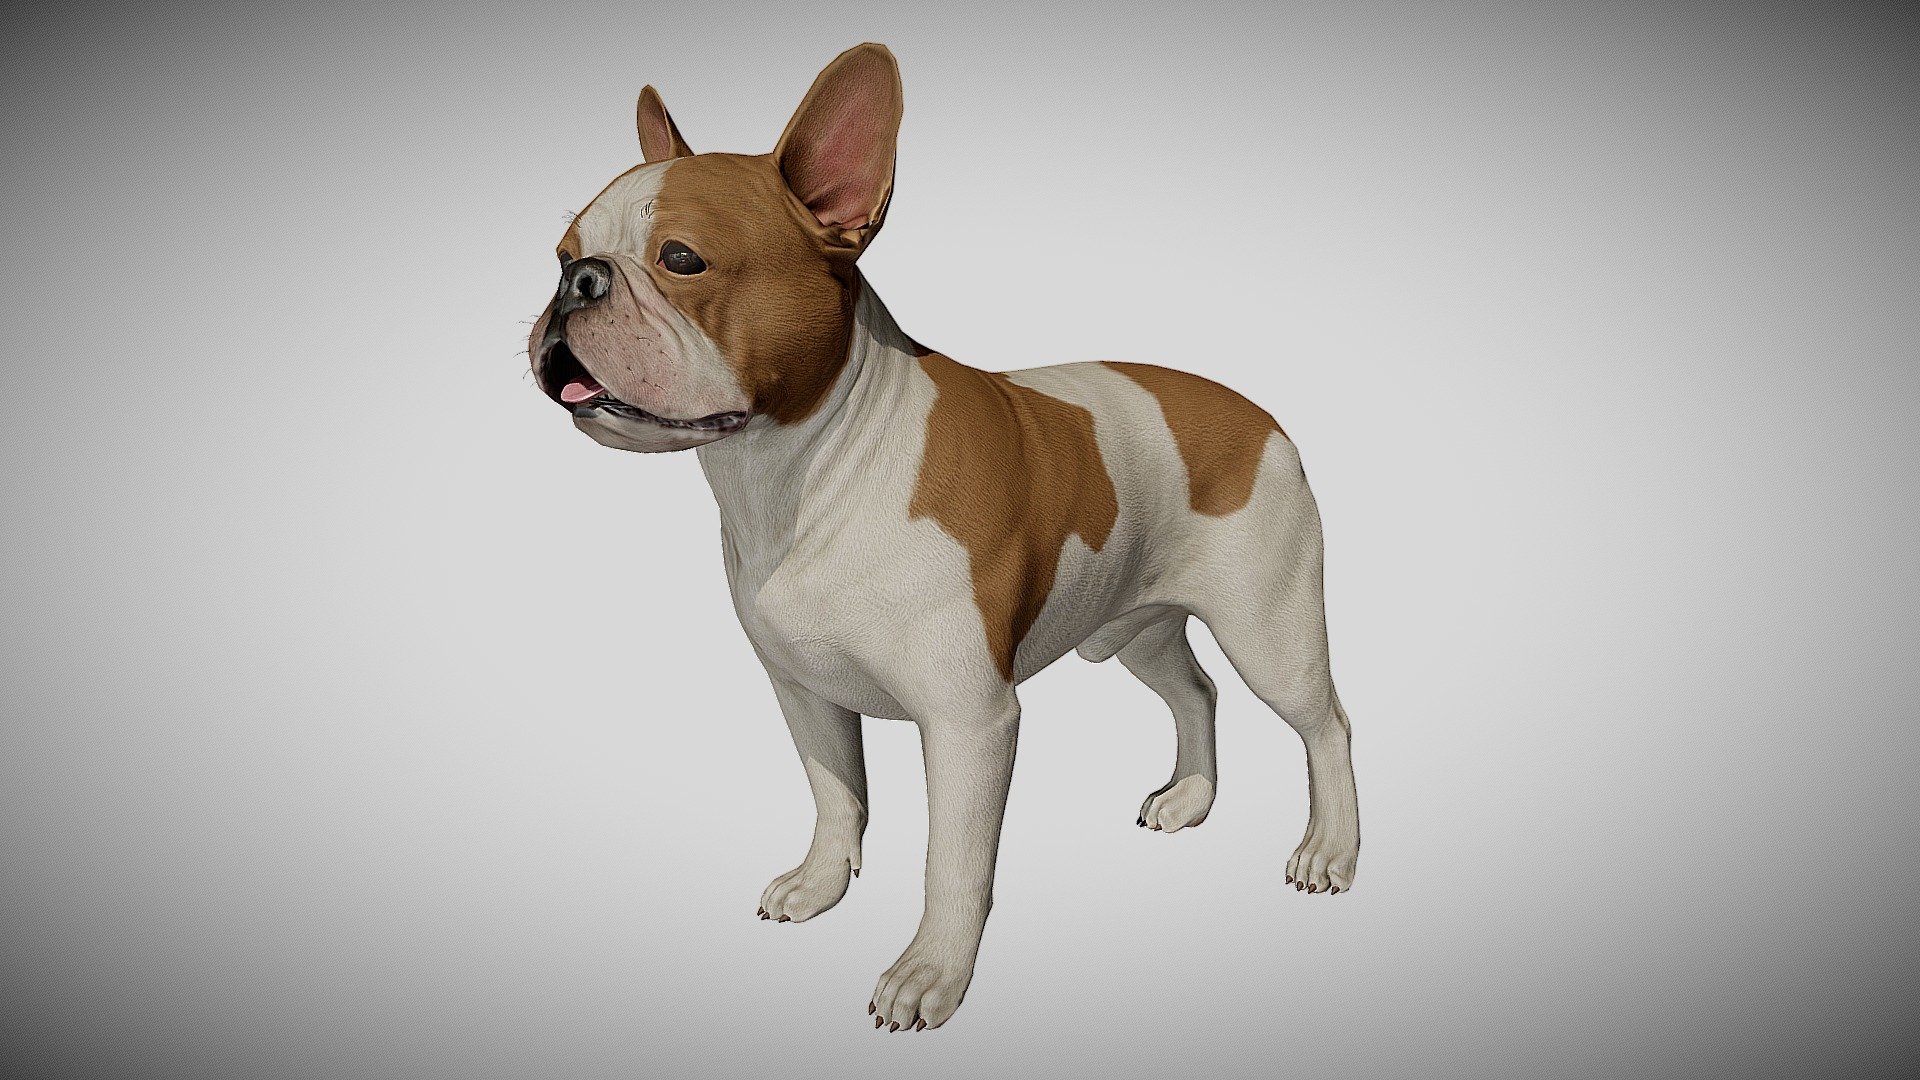 This model is designed for the next-gen real time engines using PBR technology, however it may be used with other renderers (i.e. mental ray, v-ray, etc). Fully textured, it has clean and efficient edge flow, following the anatomy of the dog. This model can be purchased HERE - French Bulldog - 3D model by alexlashko 3d model